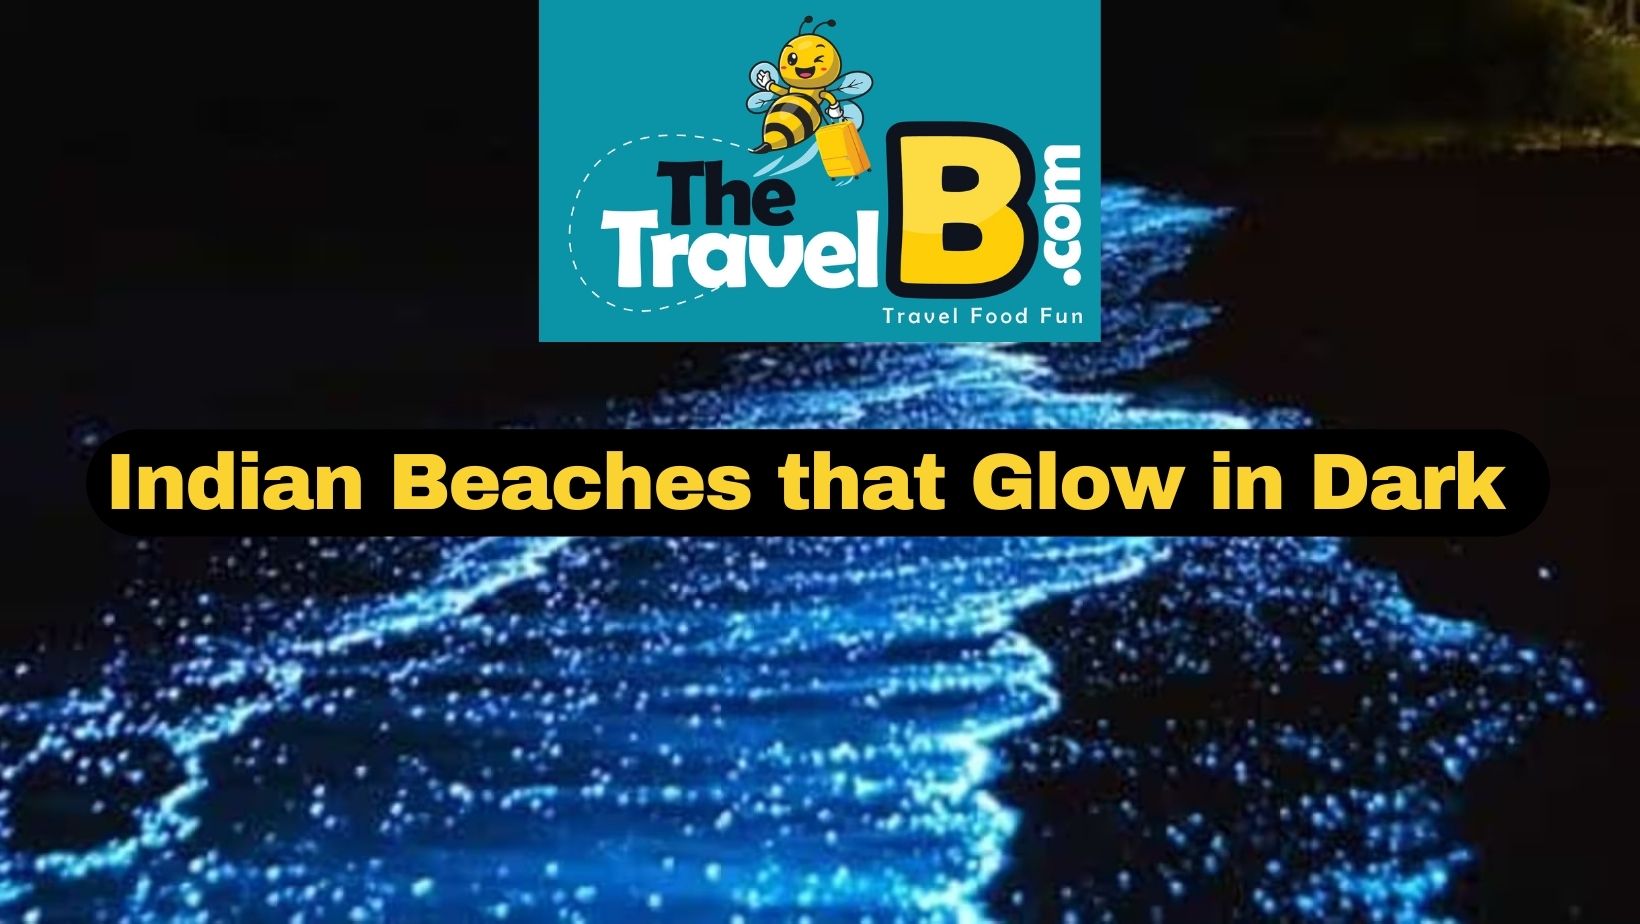 Top 10 Beaches in India that Glow at Night